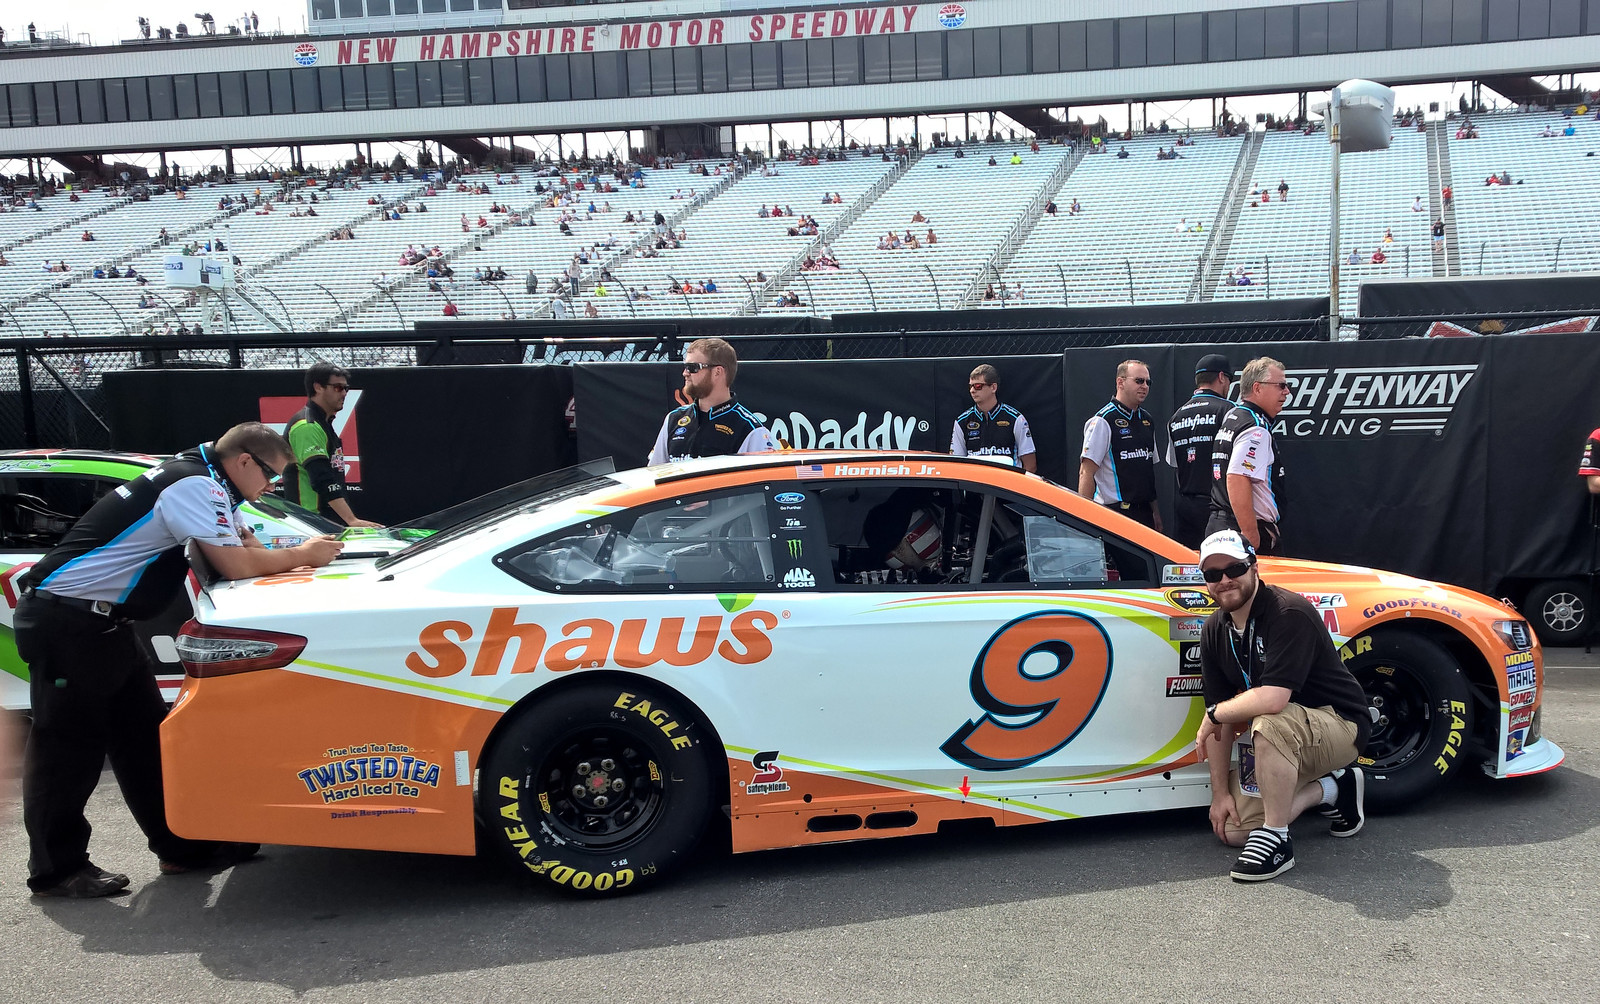 Posing with the #9 Shaw's Supermarkets Ford Fusion in the garage at New Hampshire Motor Speedway on July 17th, 2015.